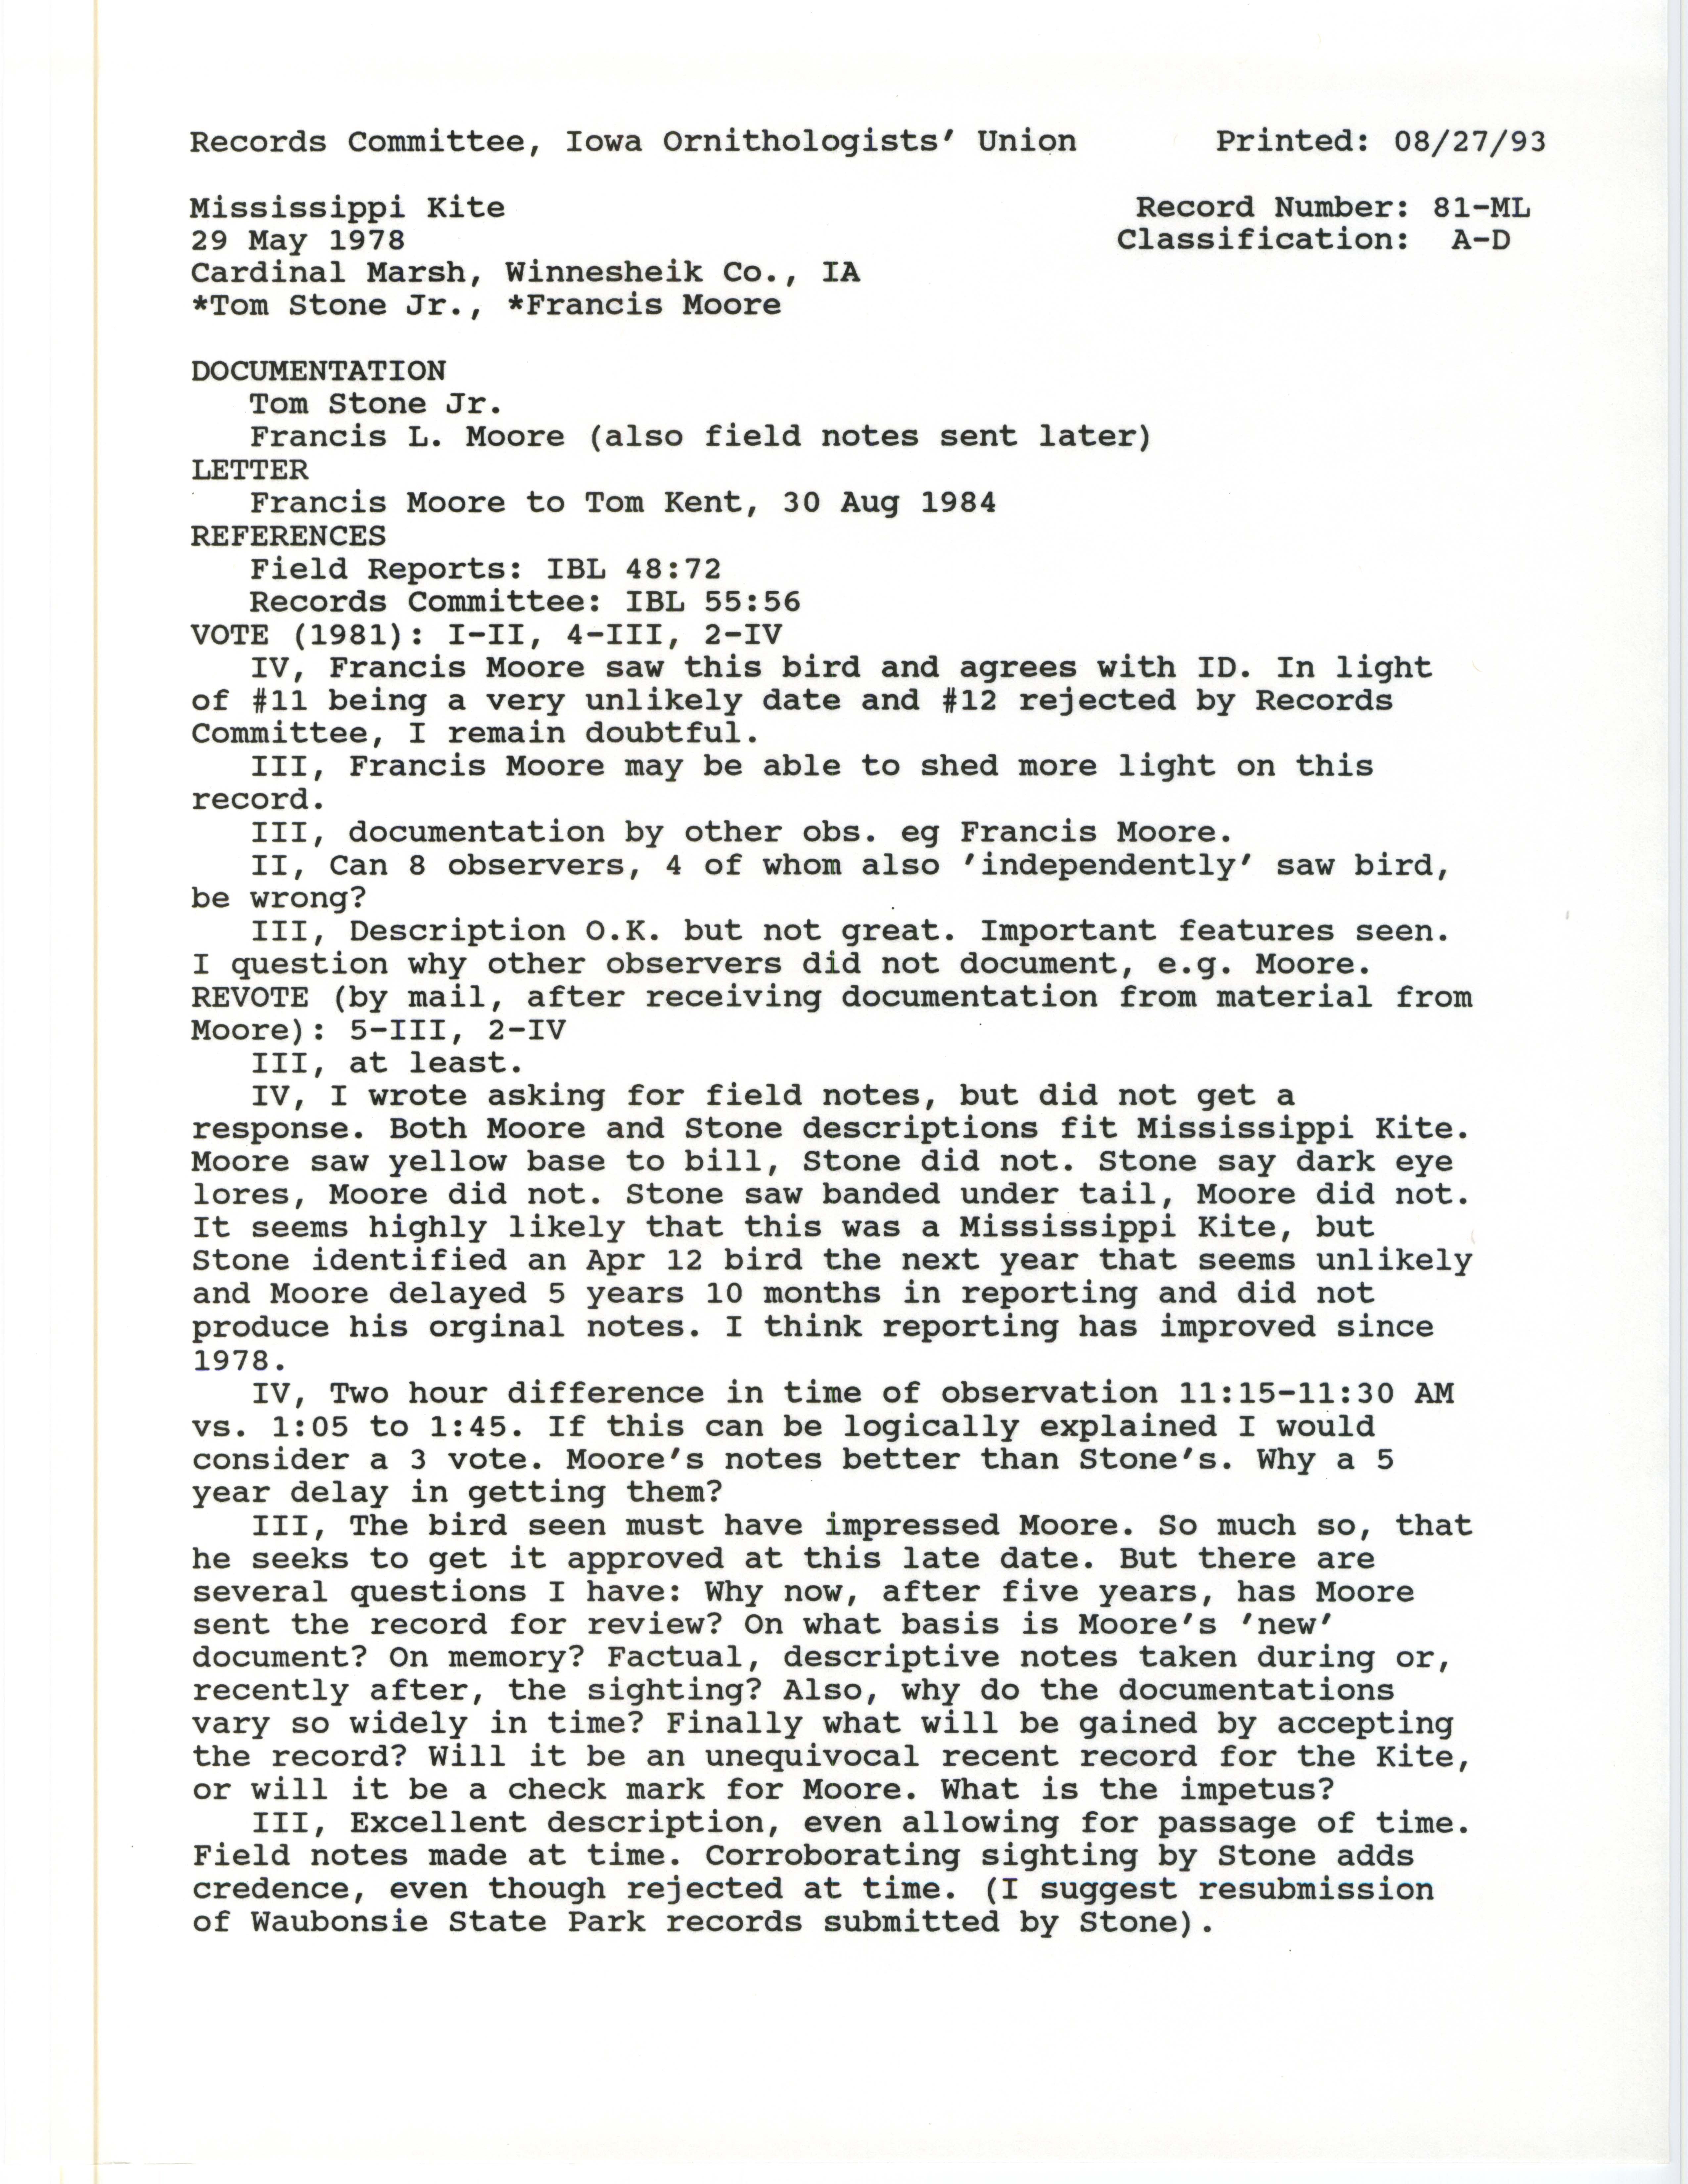 Records Committee review for rare bird sighting of Mississippi Kite at Cardinal Marsh, 1978